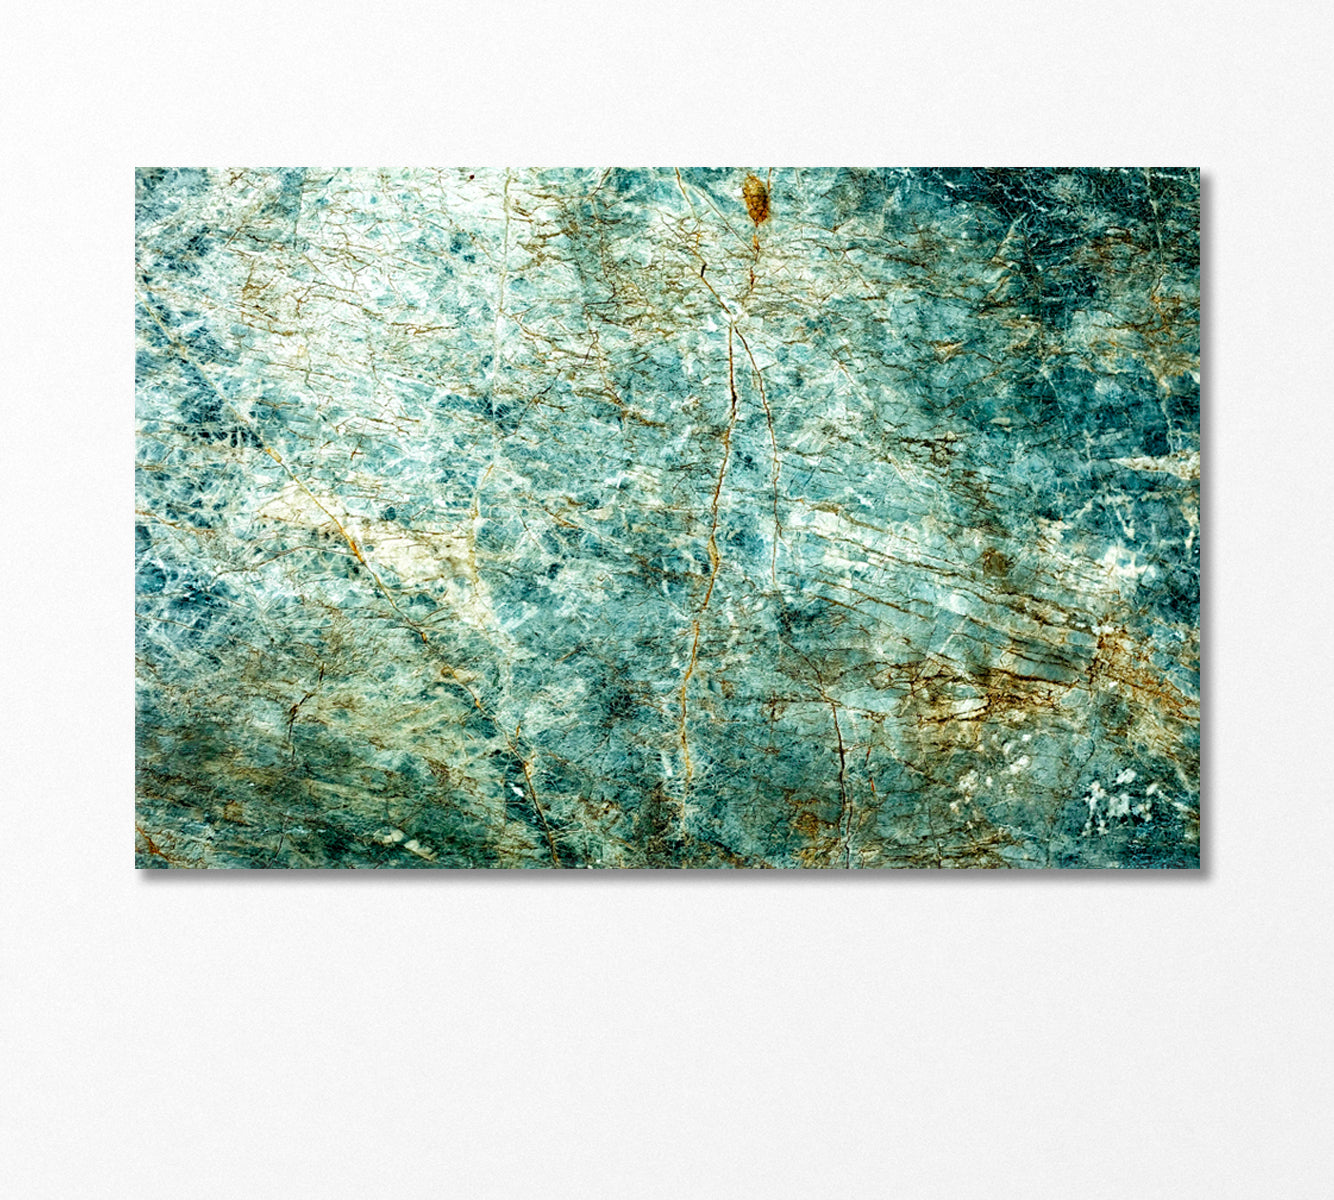 Abstract Old Stone Wall with Cracks Canvas Print-Canvas Print-CetArt-1 Panel-24x16 inches-CetArt